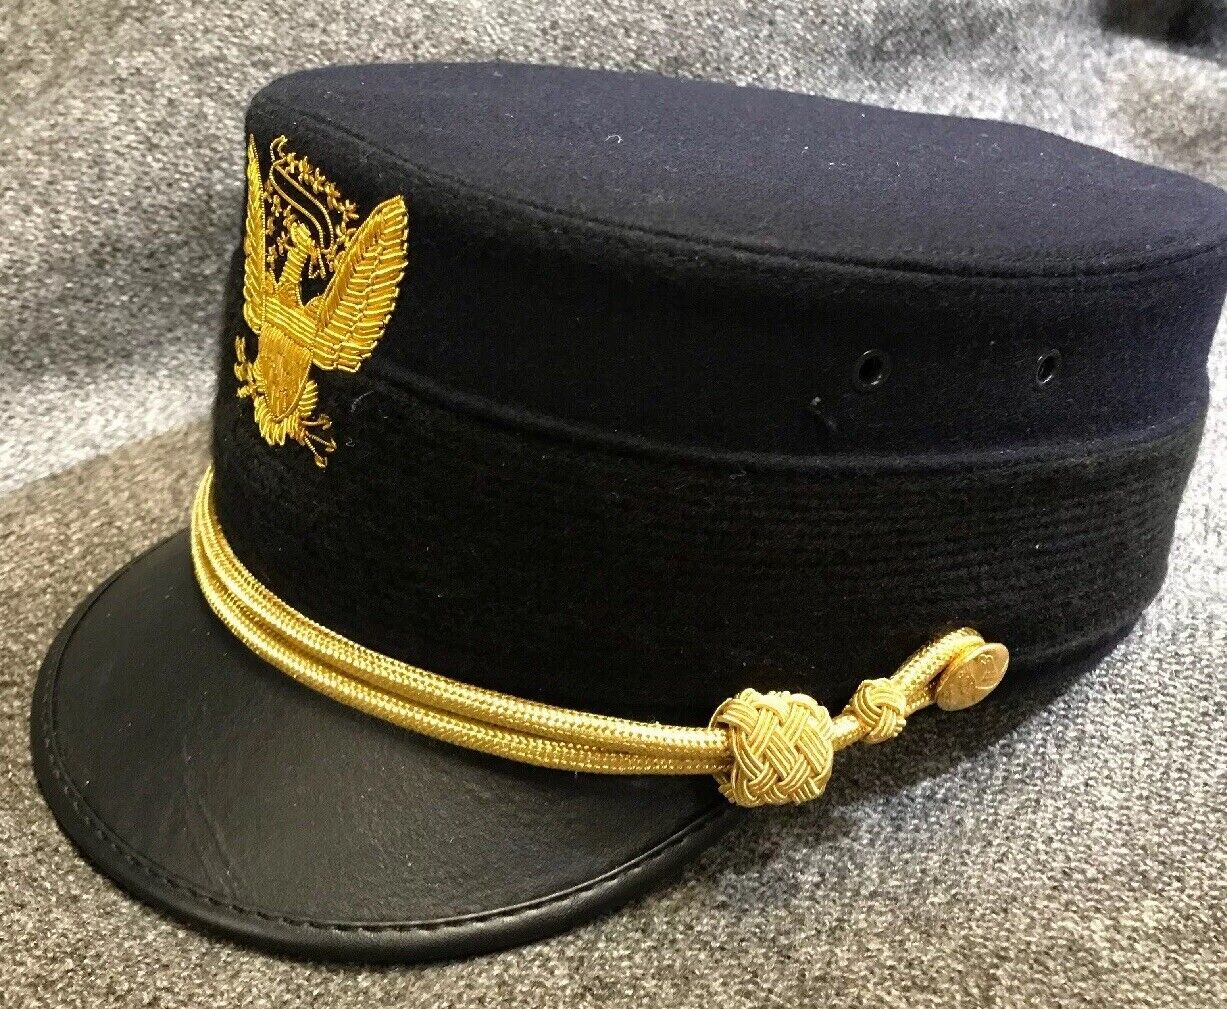 Reproduction M1895 Officer Forage Cap Size 7 1/4